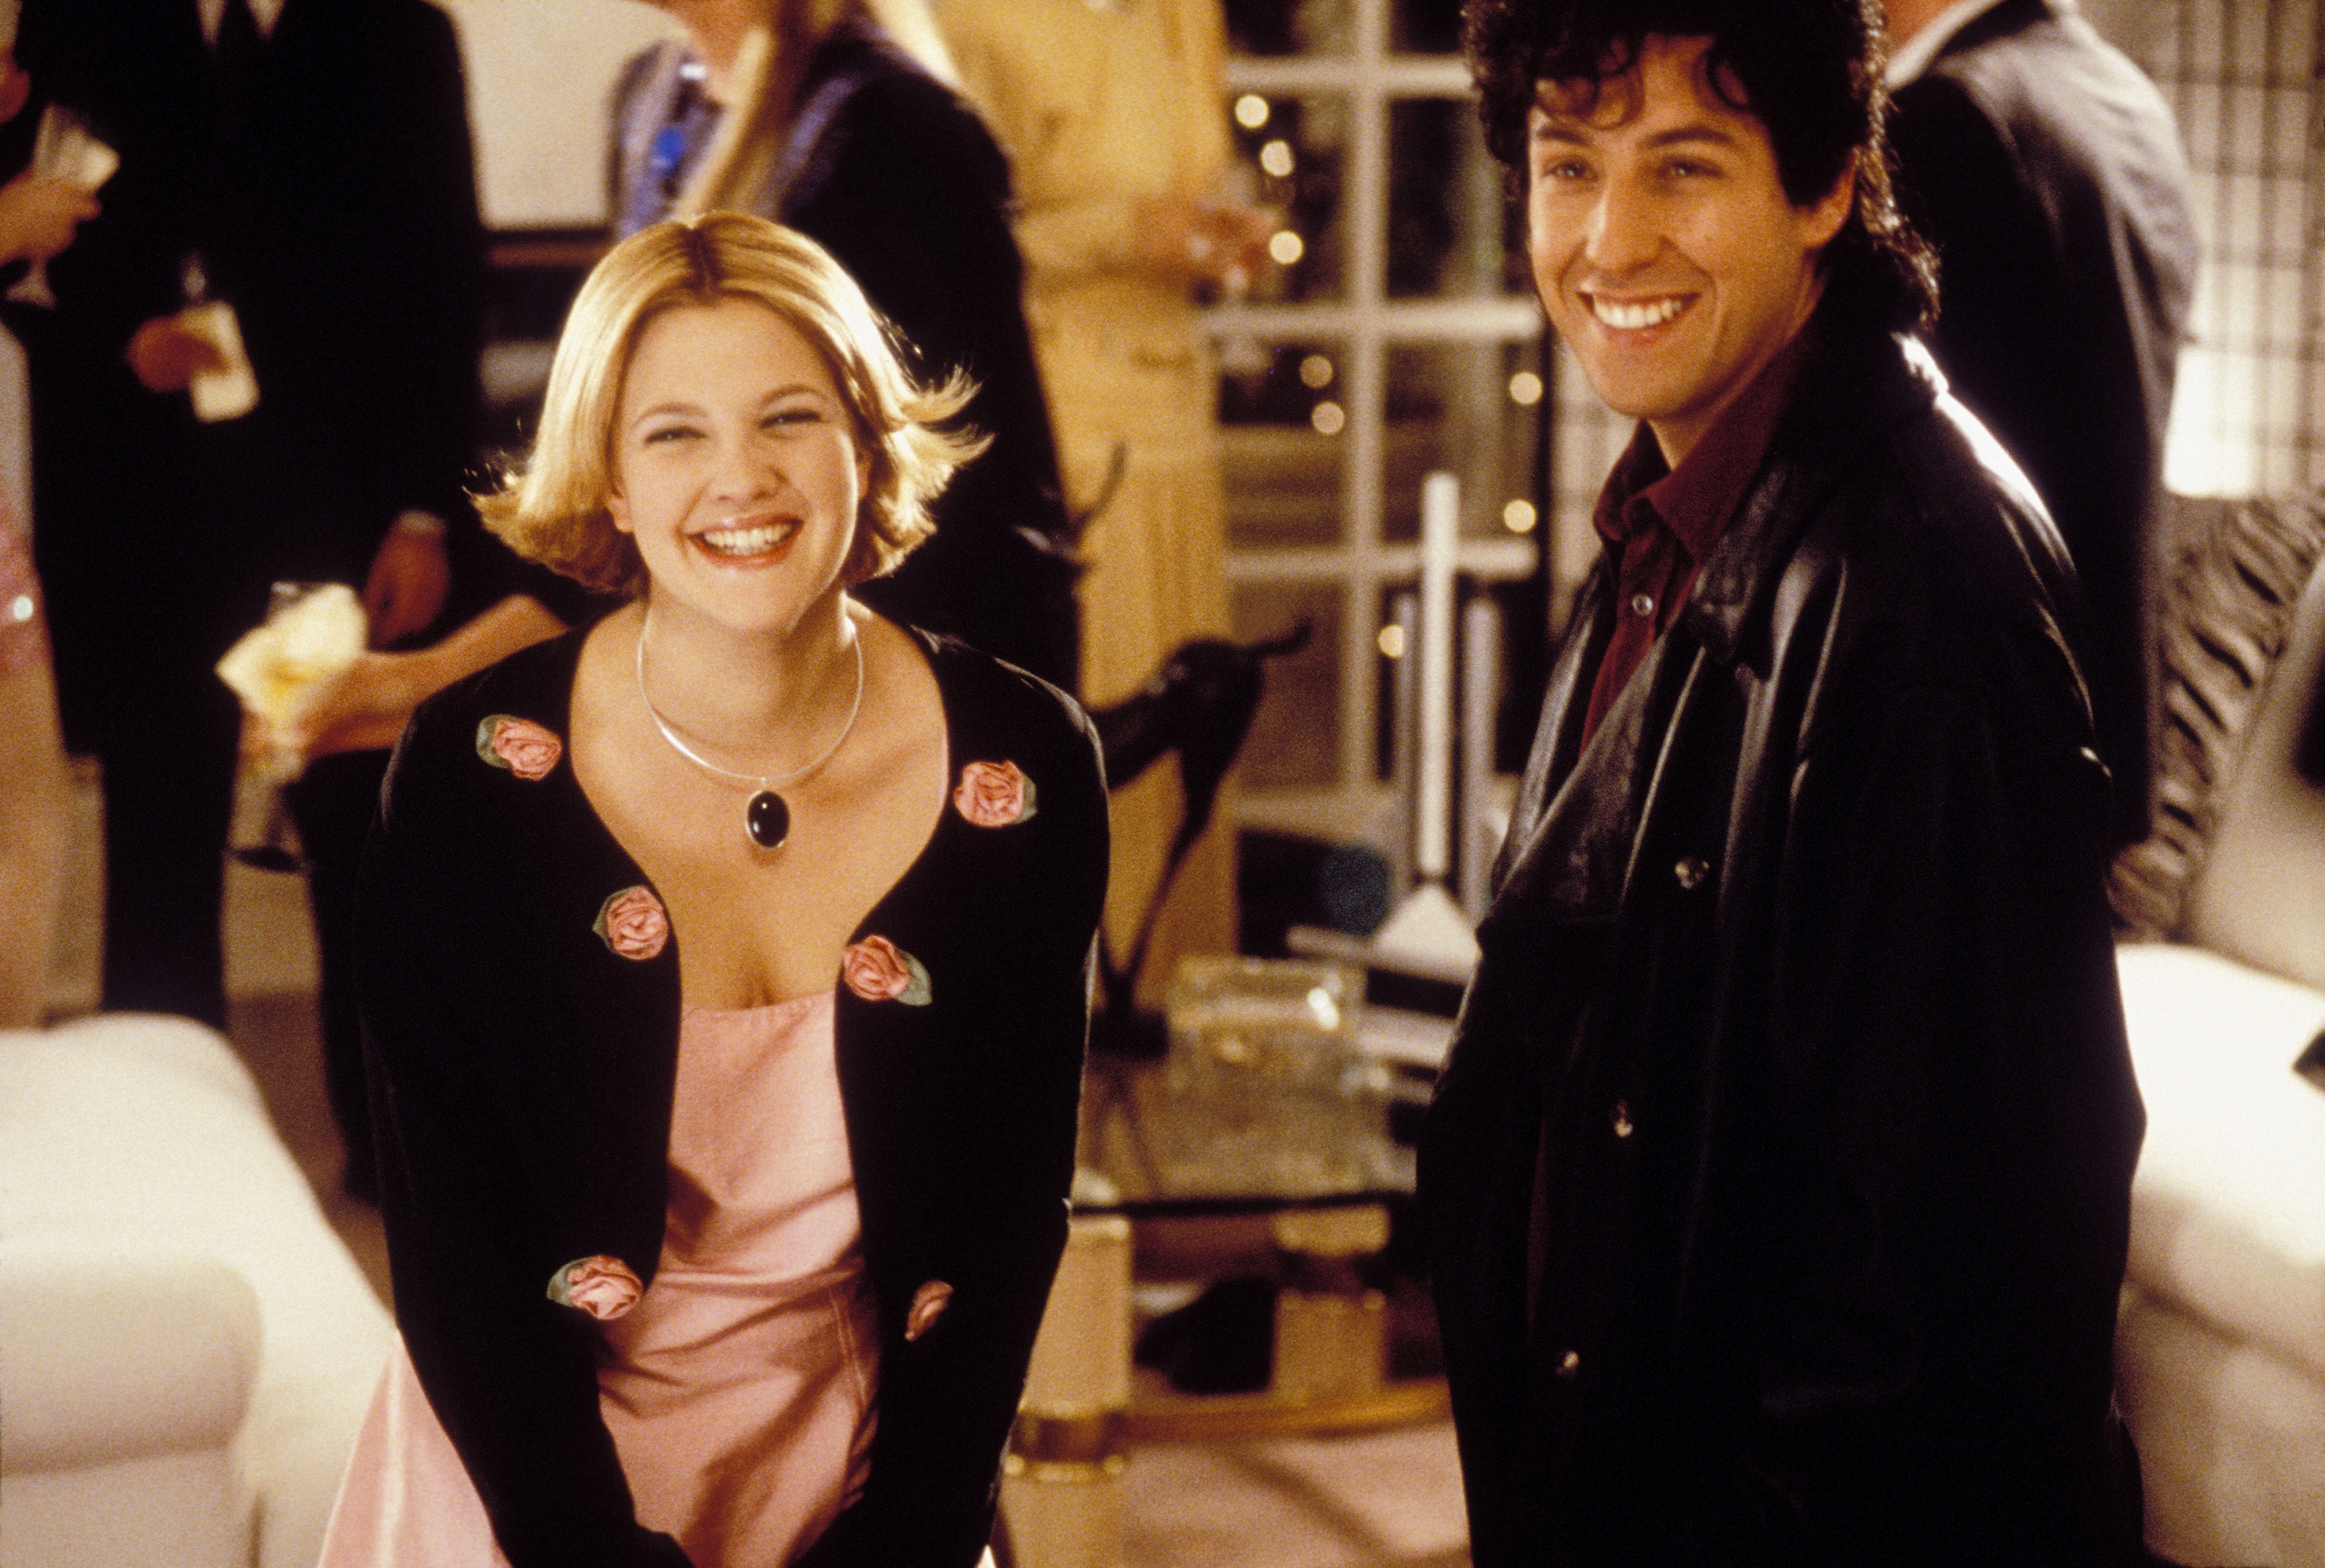 Download this The Wedding Singer picture